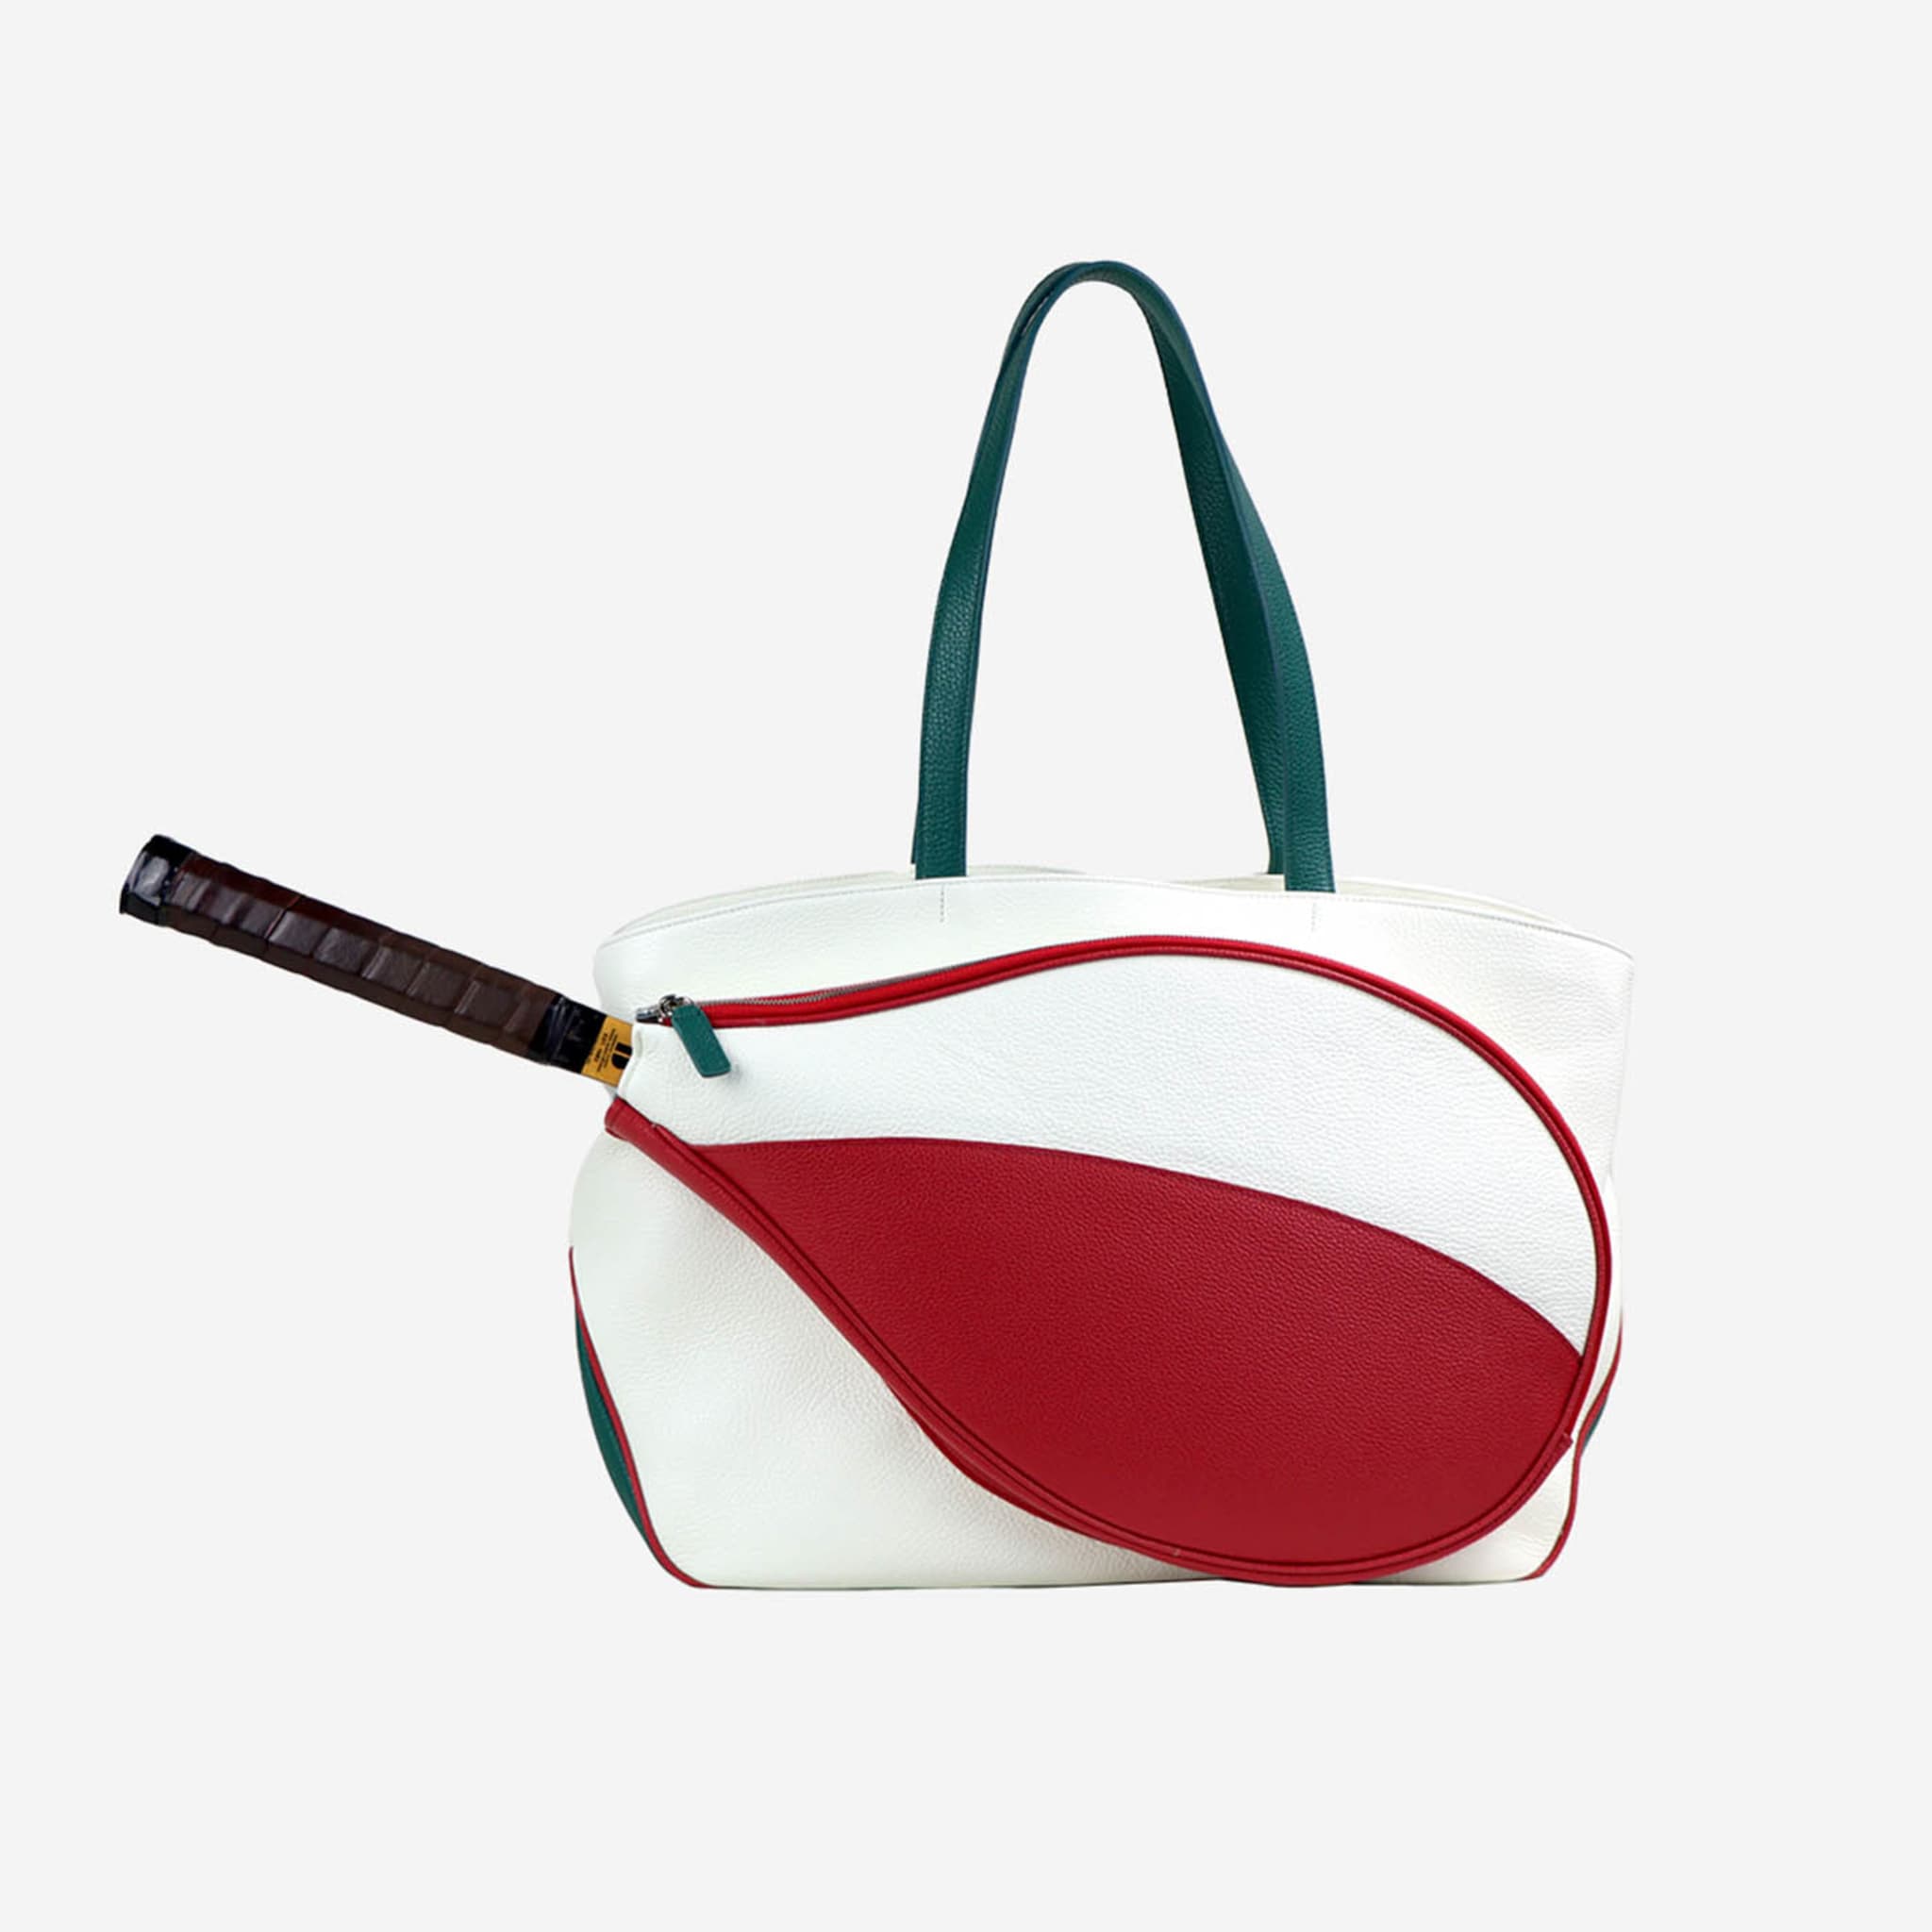 Sport White & Red Bag with Tennis-Racket-Shaped Pocket - Alternative view 5